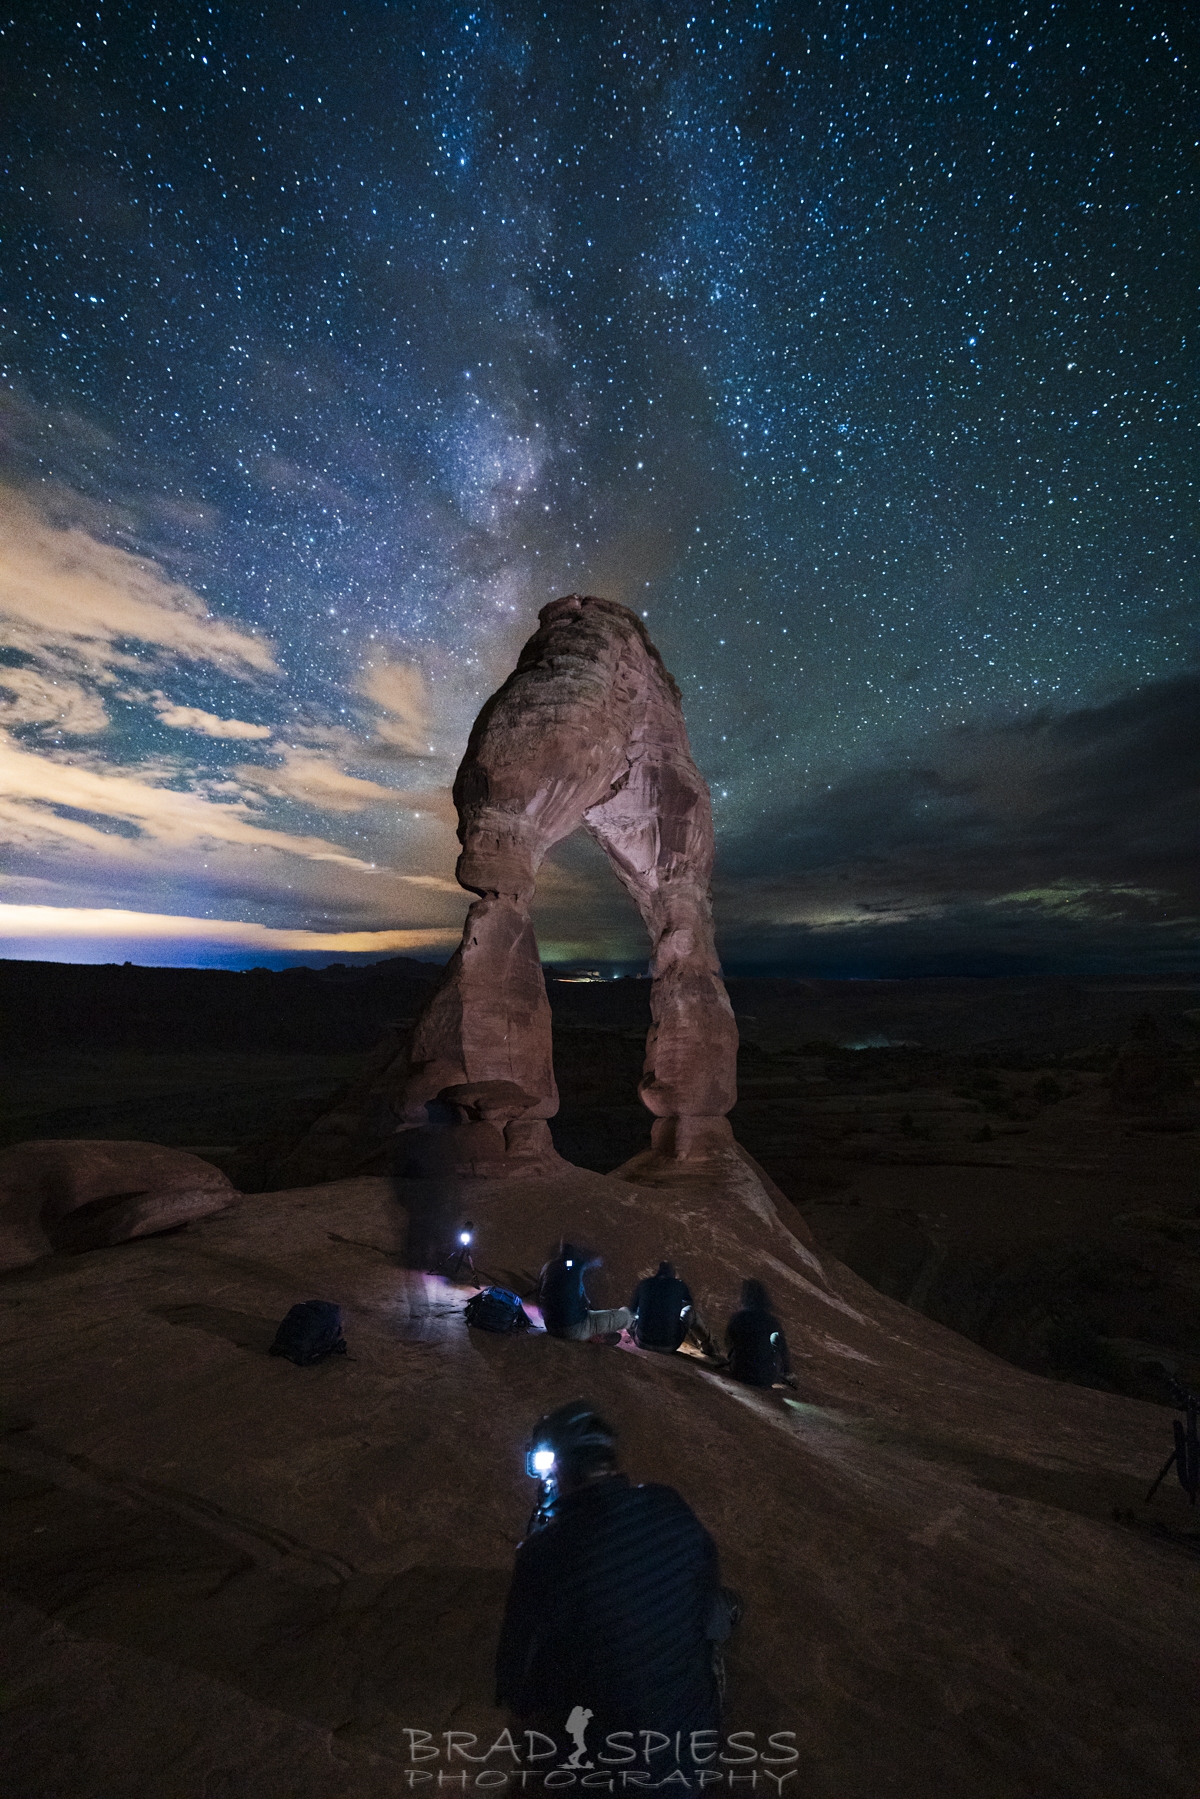 One last impromptu picture of our group shooting the Milky Way at Delicate Arch